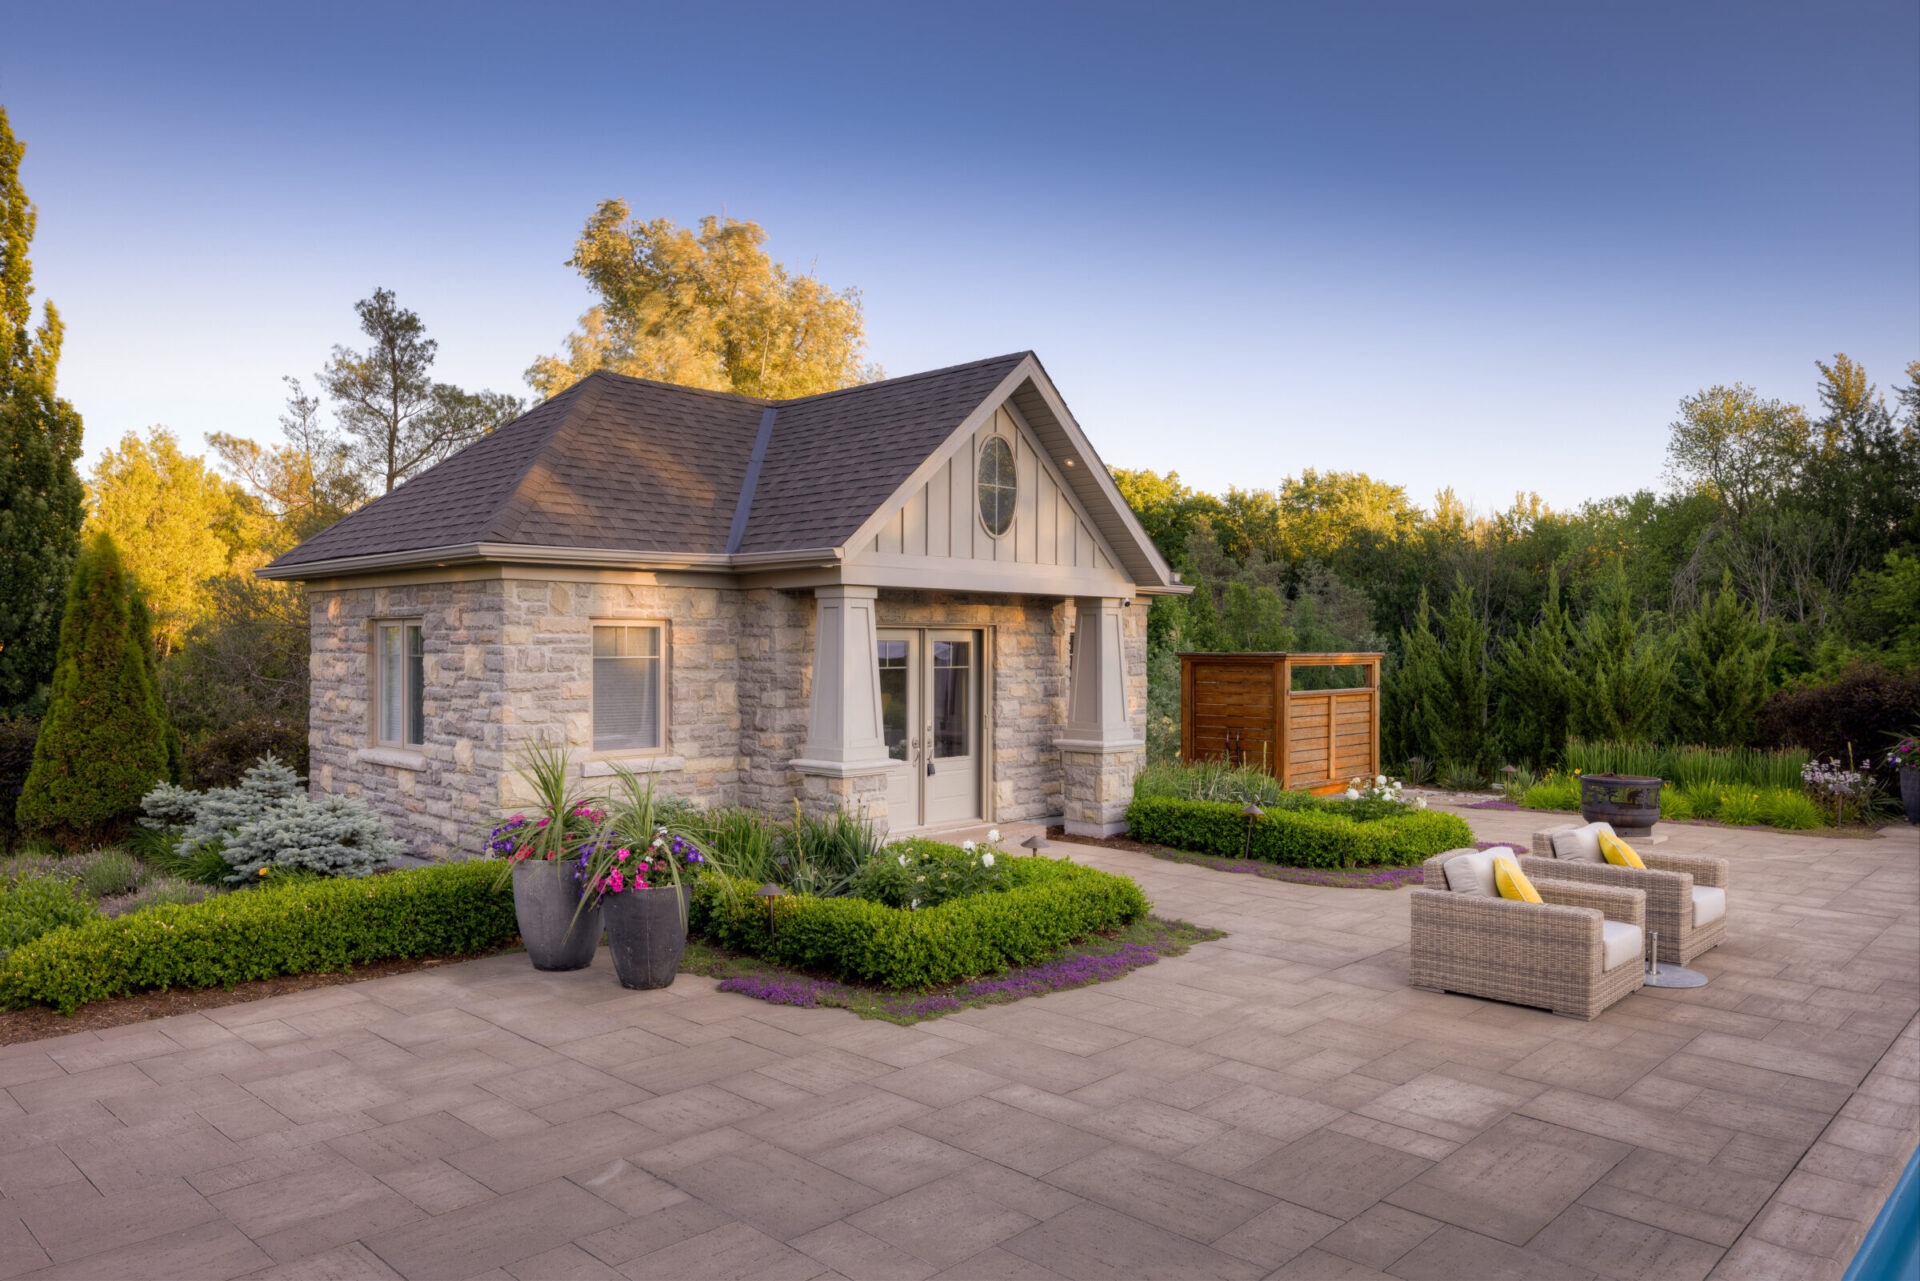 A quaint stone house with a gabled roof, flanked by lush gardens and outdoor furniture on a paver patio, set against a backdrop of trees at dusk.